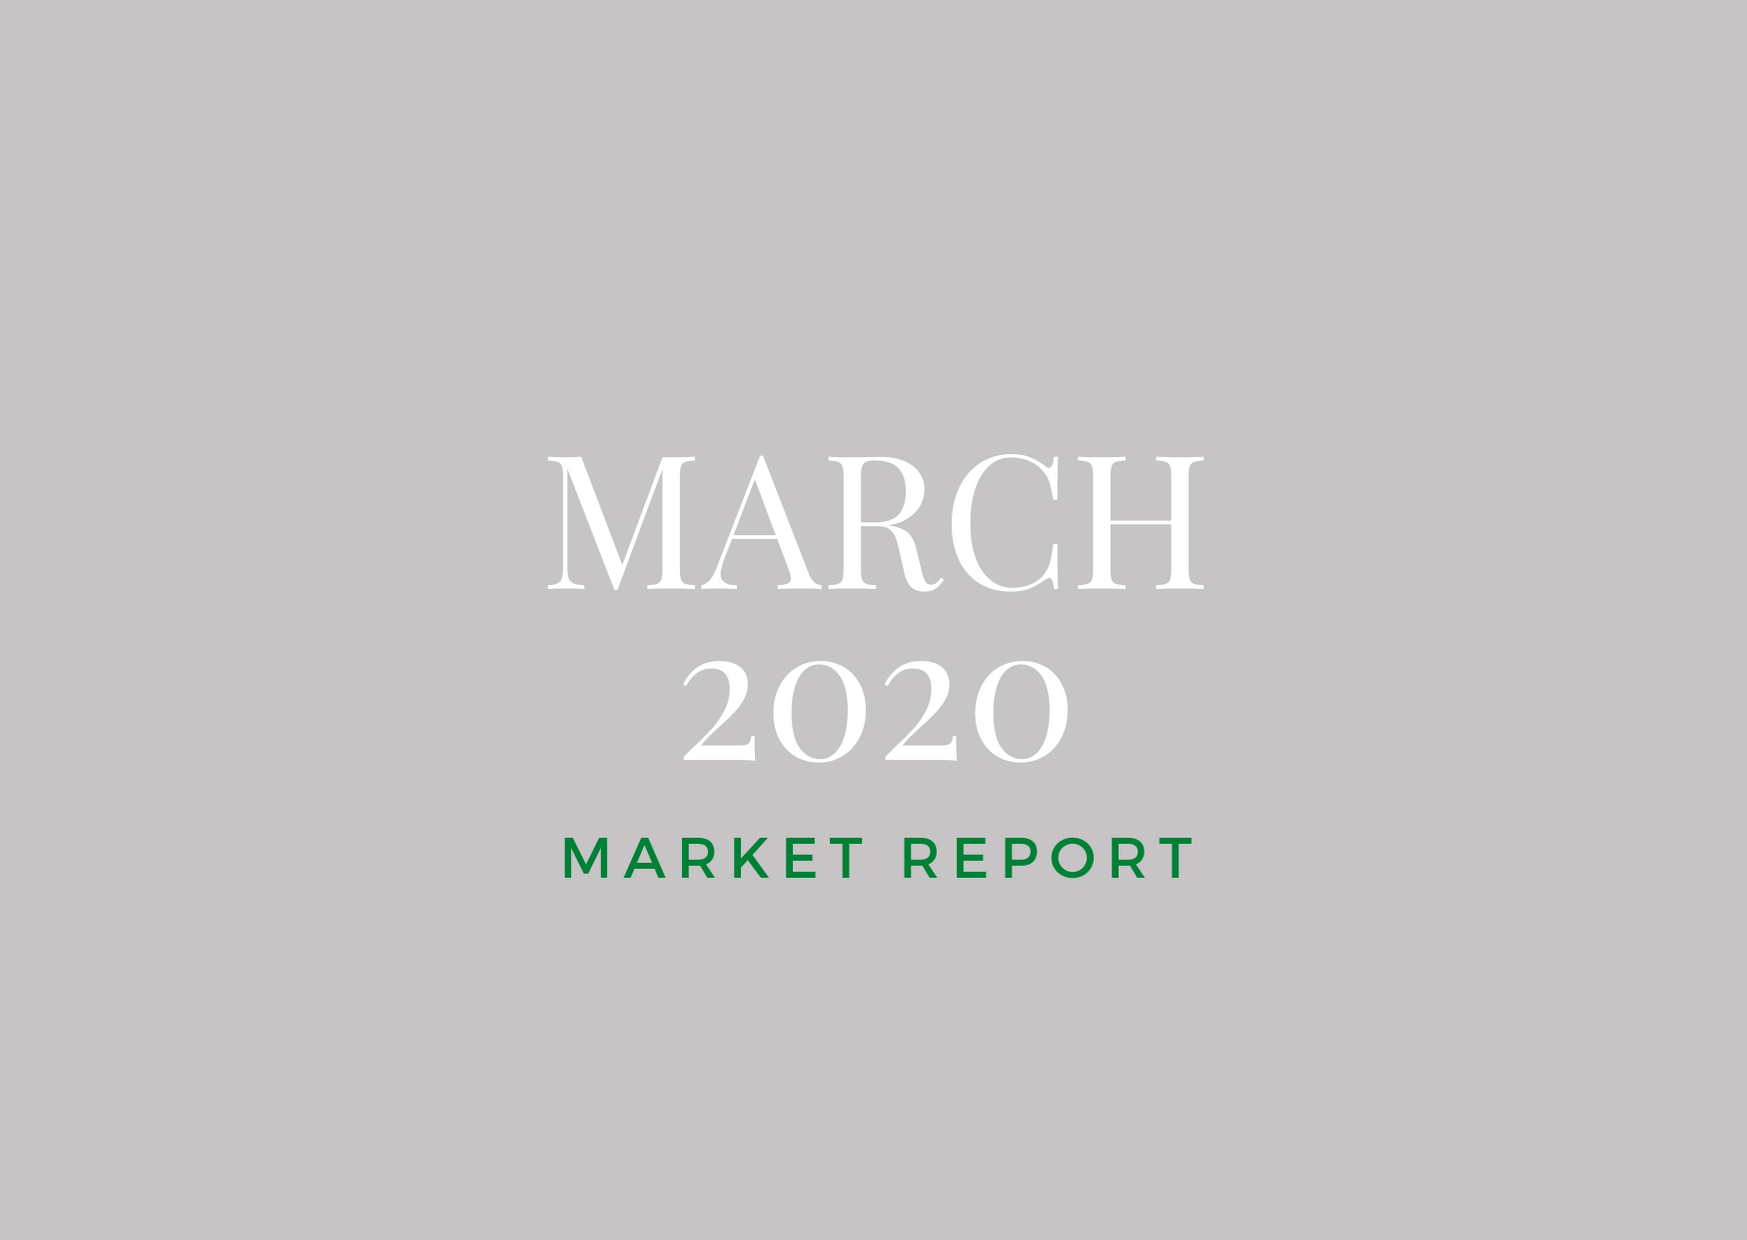 March 2020 Market Report